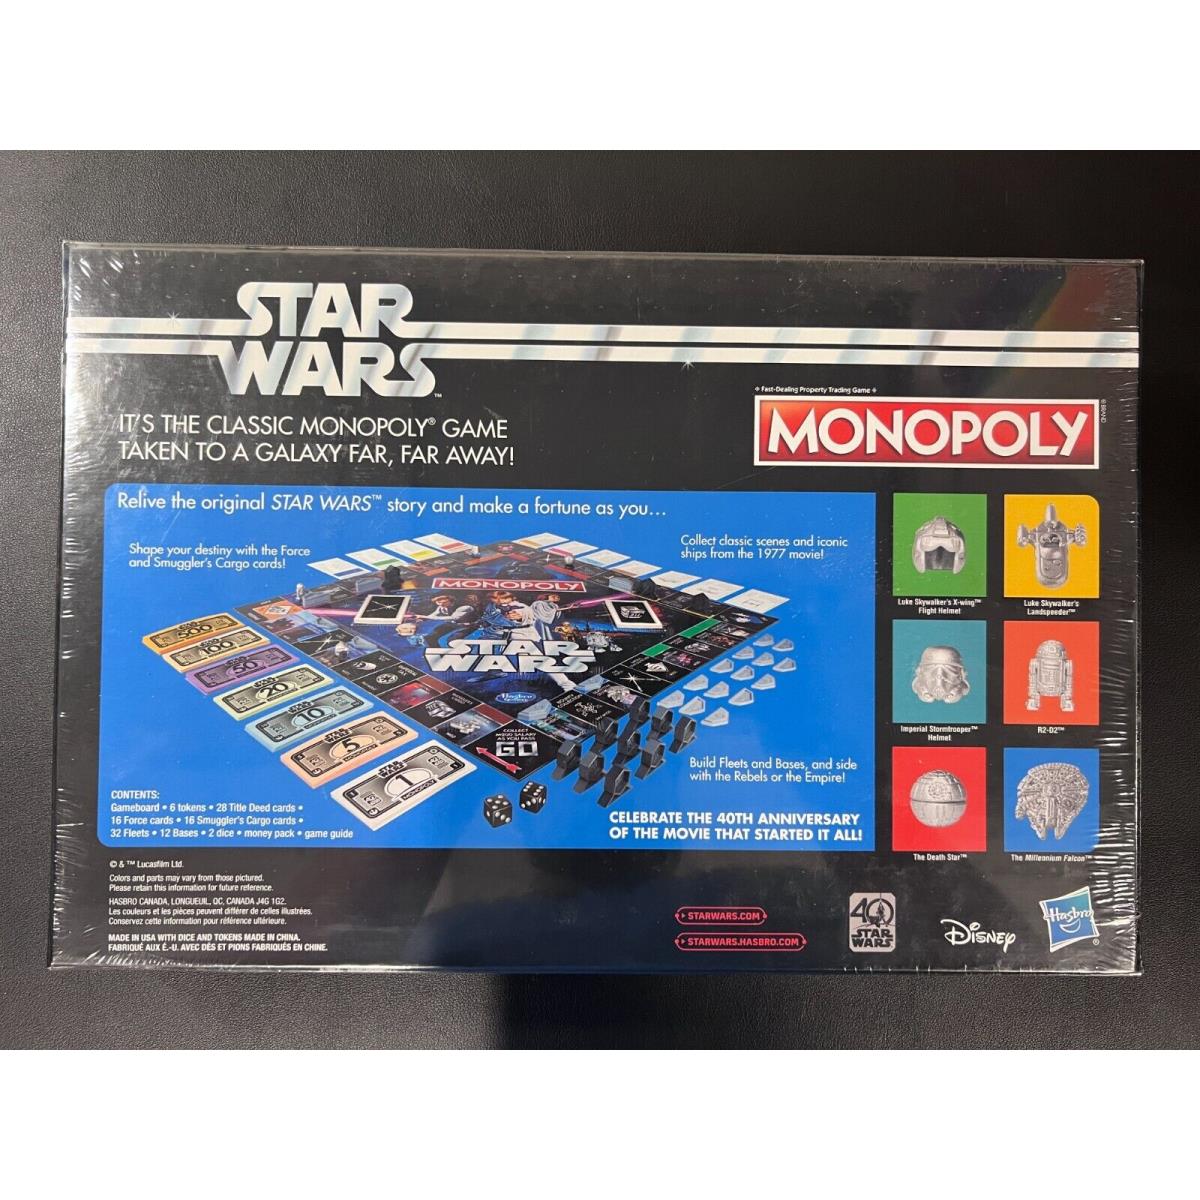 Habsro Monopoly Star Wars 40th Anniversary Special Edition